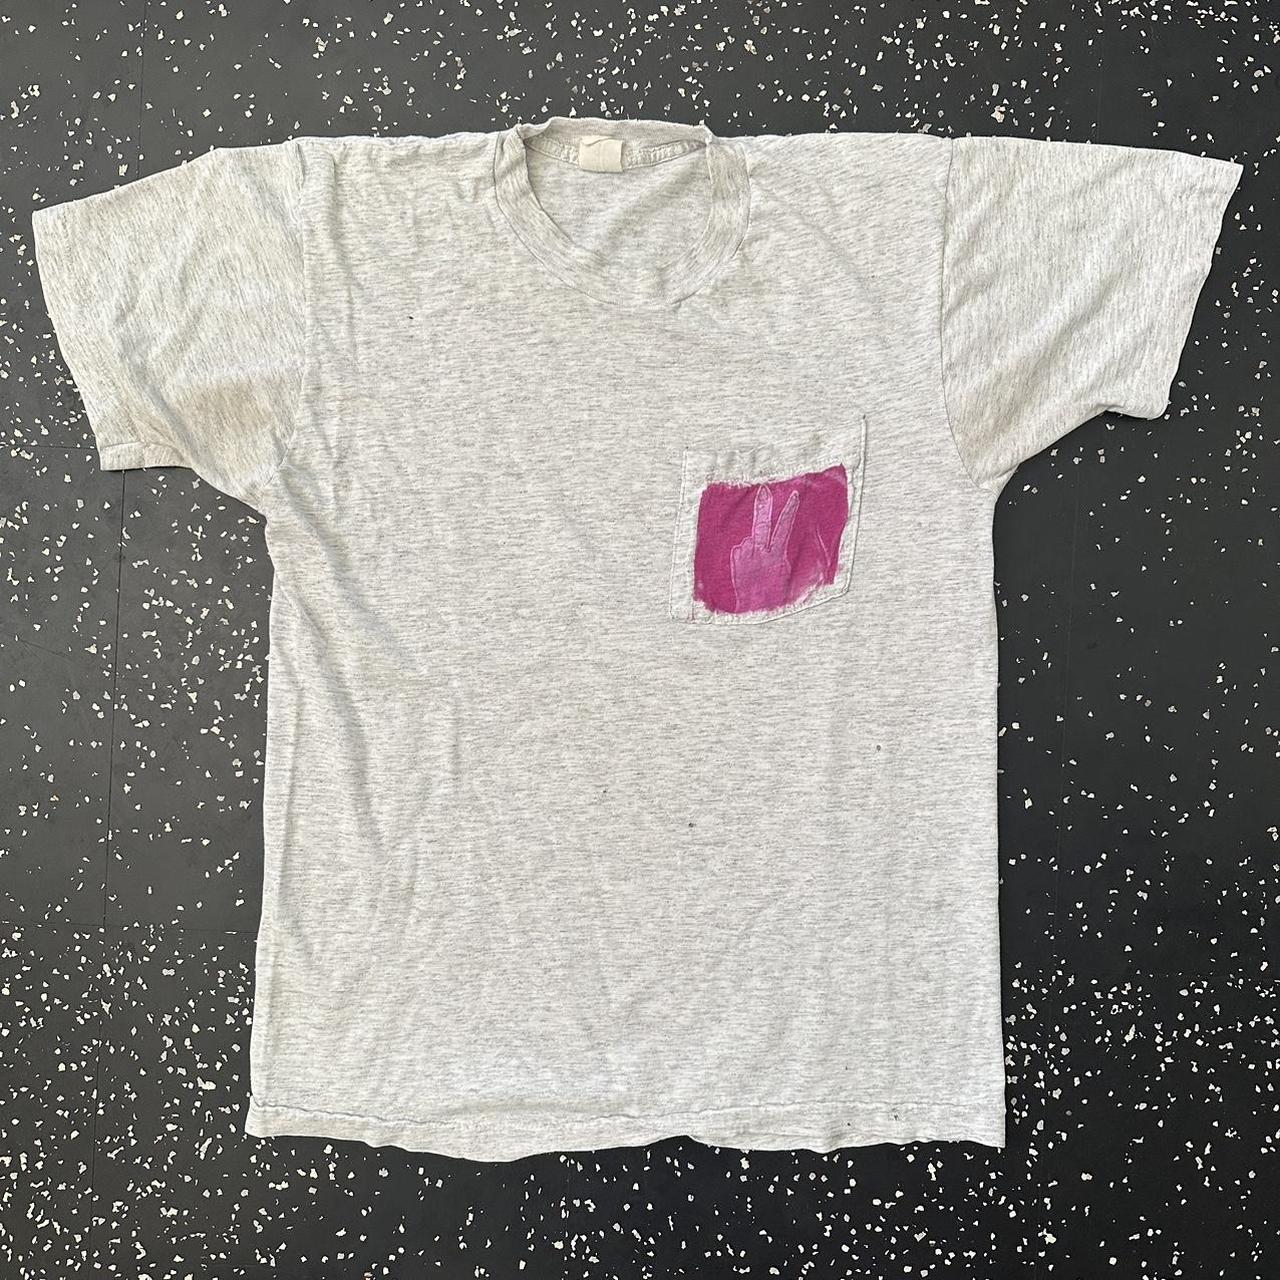 one-off hand-printed pocket tee. original drawing by...